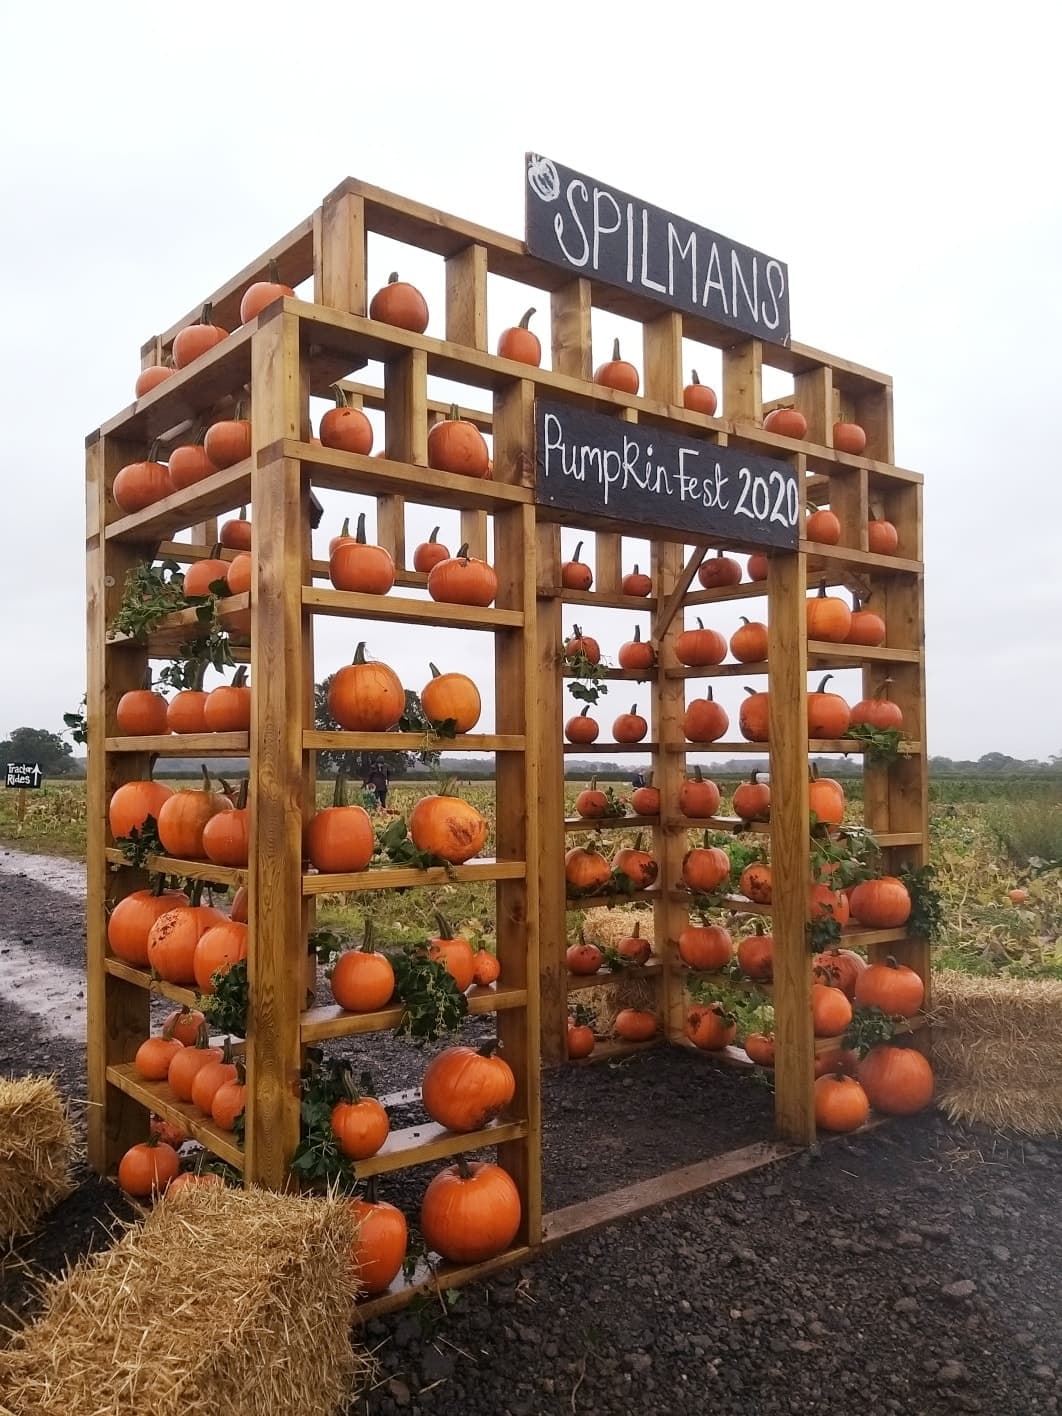 Spilman's Cafe and Pick Your Own Pumpkins